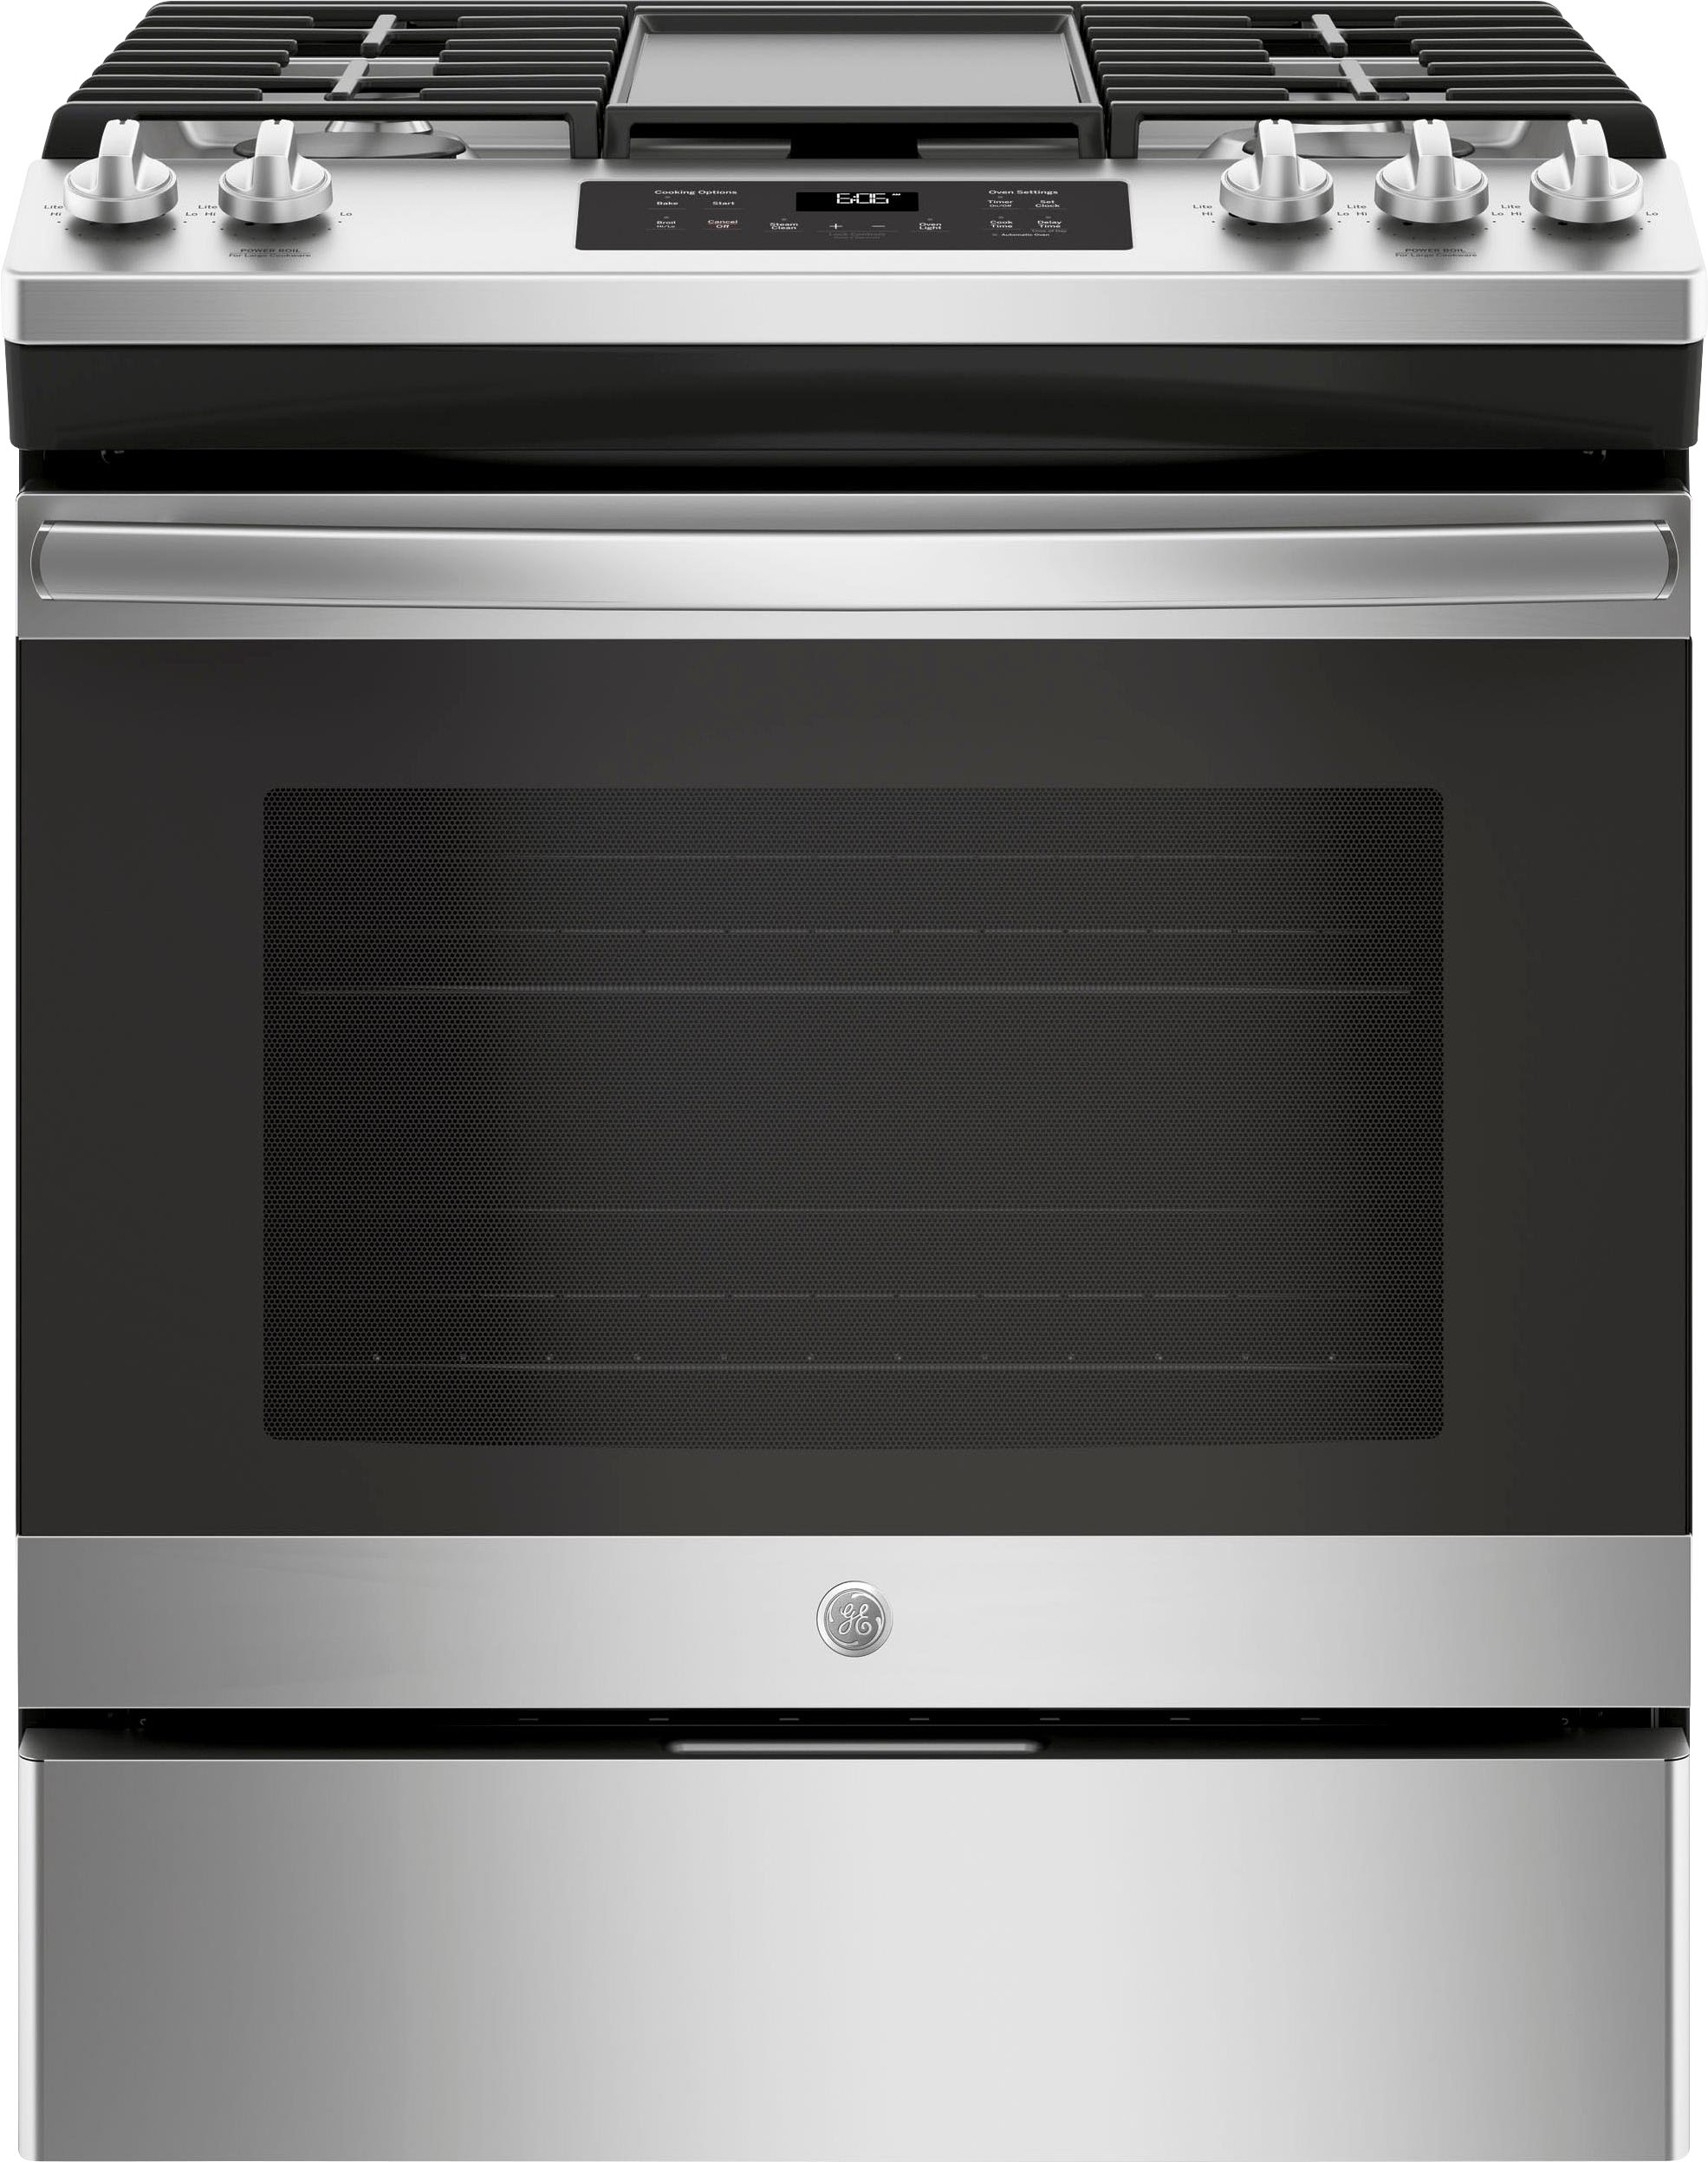 GE 30 in. 5.3 cu. ft. Slide-In Gas Range in Stainless Steel with Griddle  JGSS66SELSS - The Home Depot